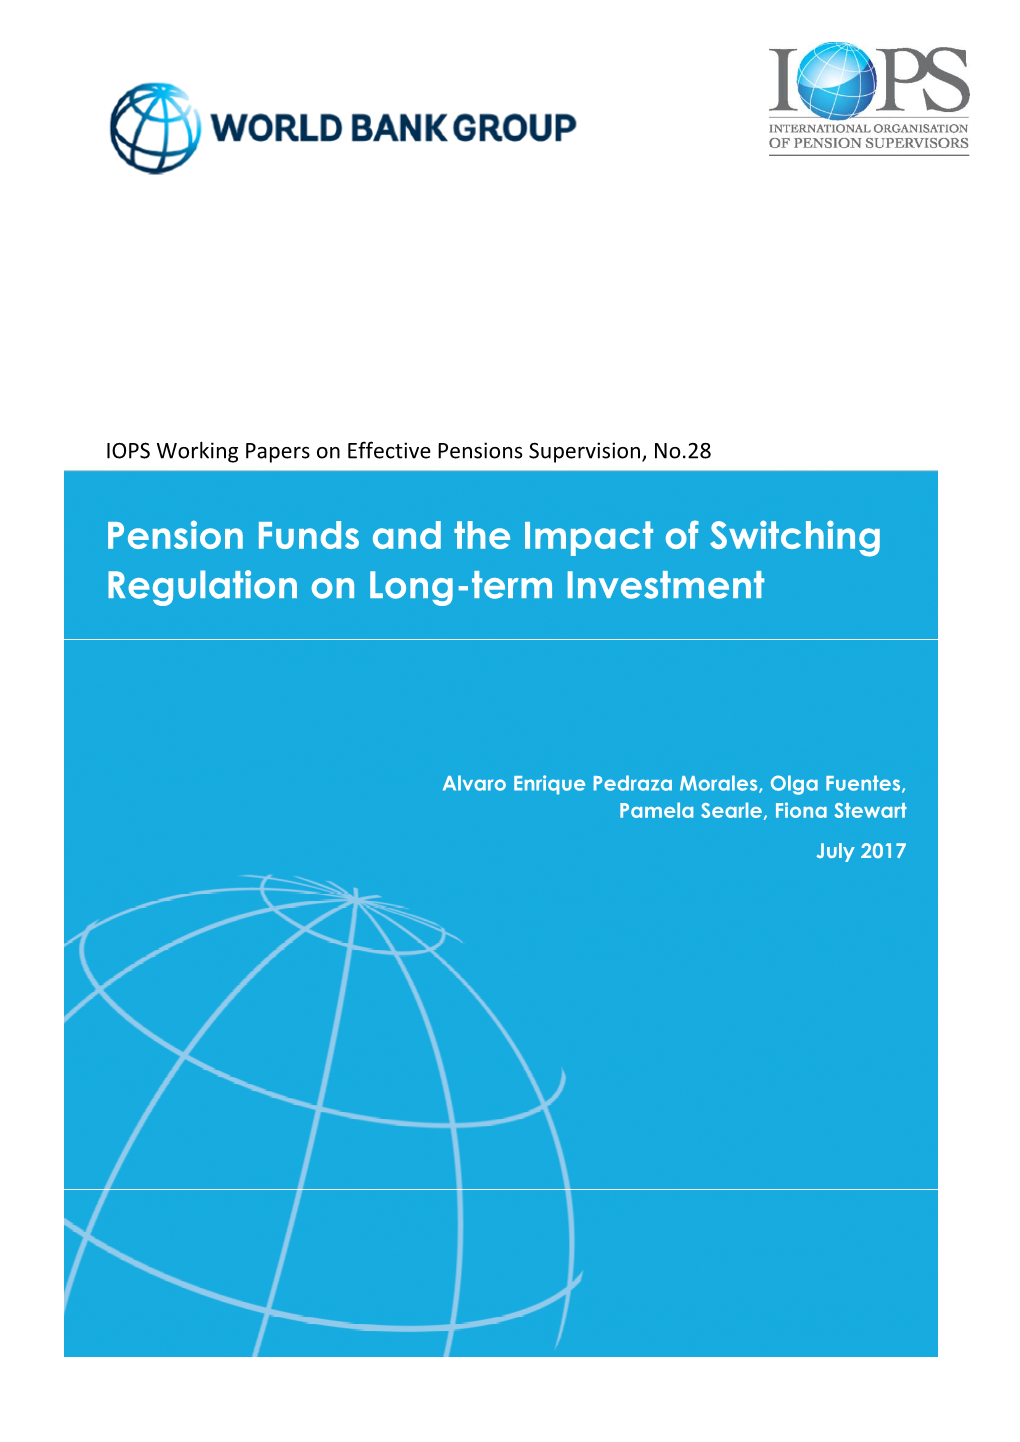 Pension Funds and the Impact of Switching Regulation on Long-Term Investment